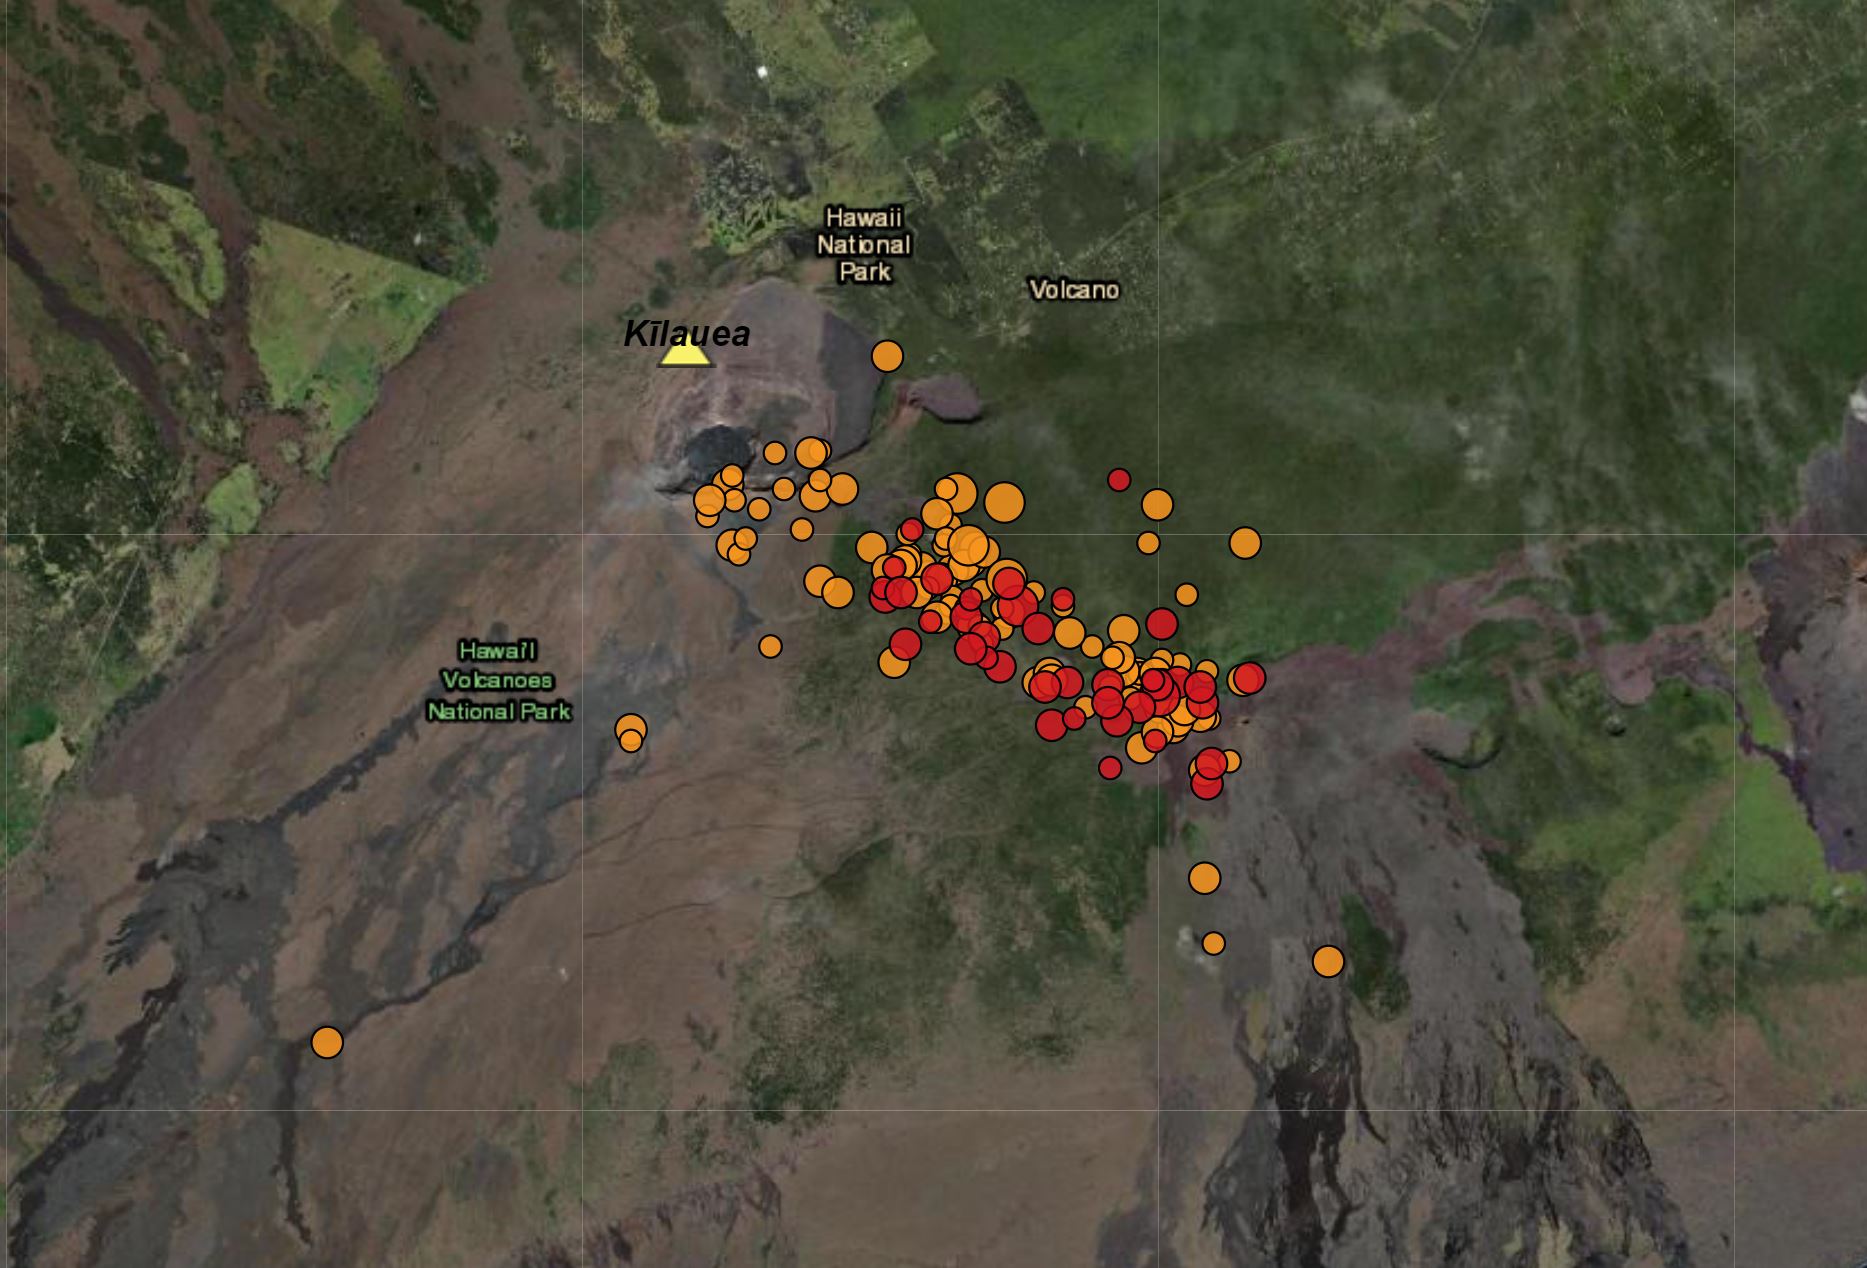 A map showing earthquakes at Kīlauea summit with red dots.